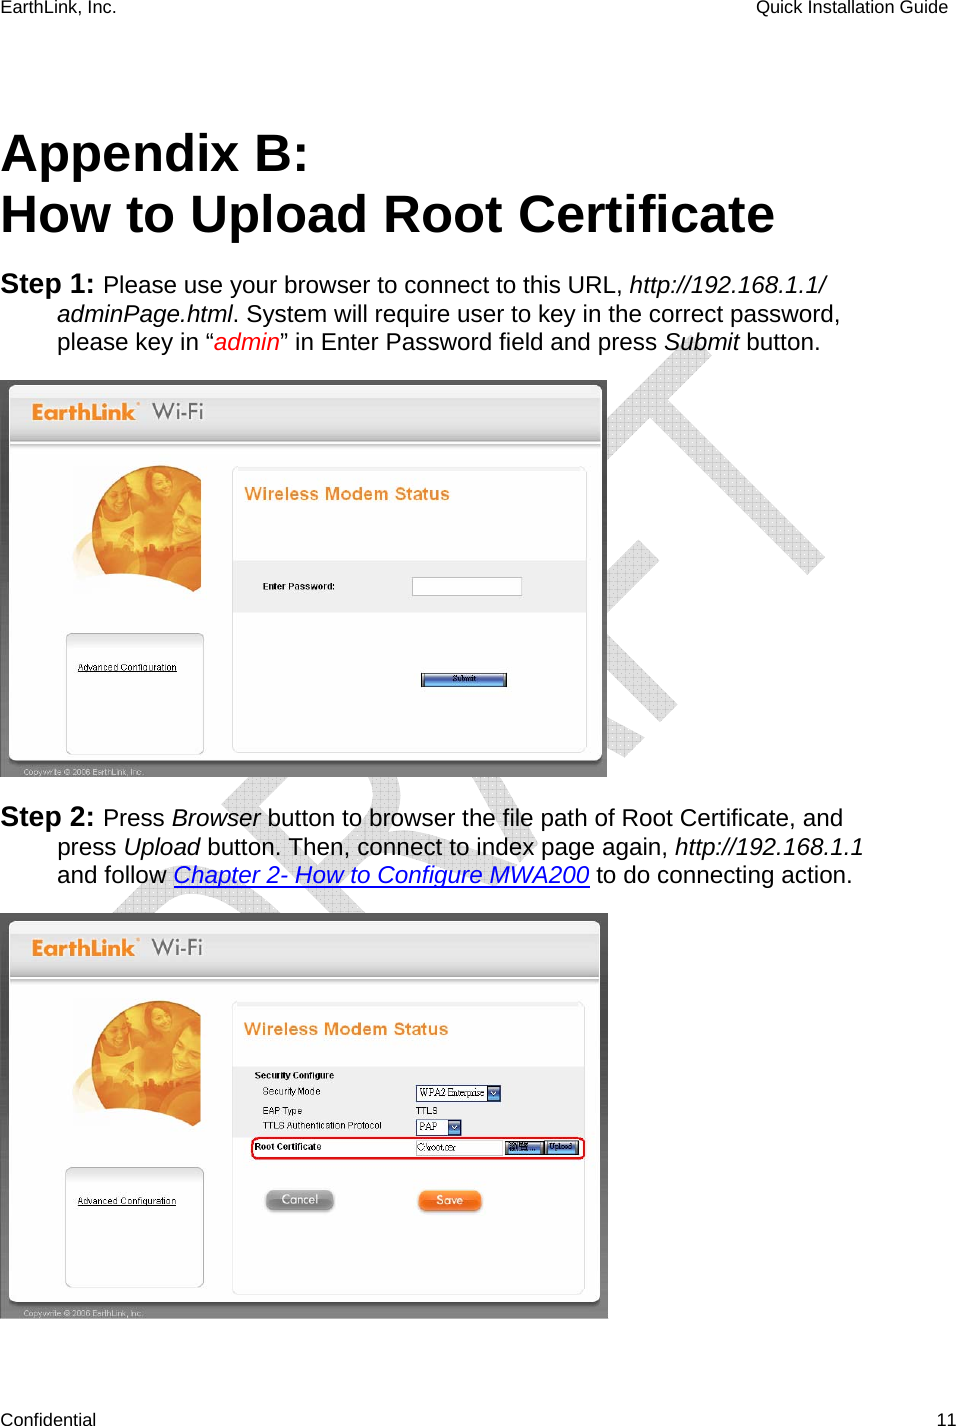 EarthLink, Inc.    Quick Installation Guide    Confidential   11  Appendix B:  How to Upload Root Certificate Step 1: Please use your browser to connect to this URL, http://192.168.1.1/ adminPage.html. System will require user to key in the correct password, please key in “admin” in Enter Password field and press Submit button.  Step 2: Press Browser button to browser the file path of Root Certificate, and press Upload button. Then, connect to index page again, http://192.168.1.1 and follow Chapter 2- How to Configure MWA200 to do connecting action.  